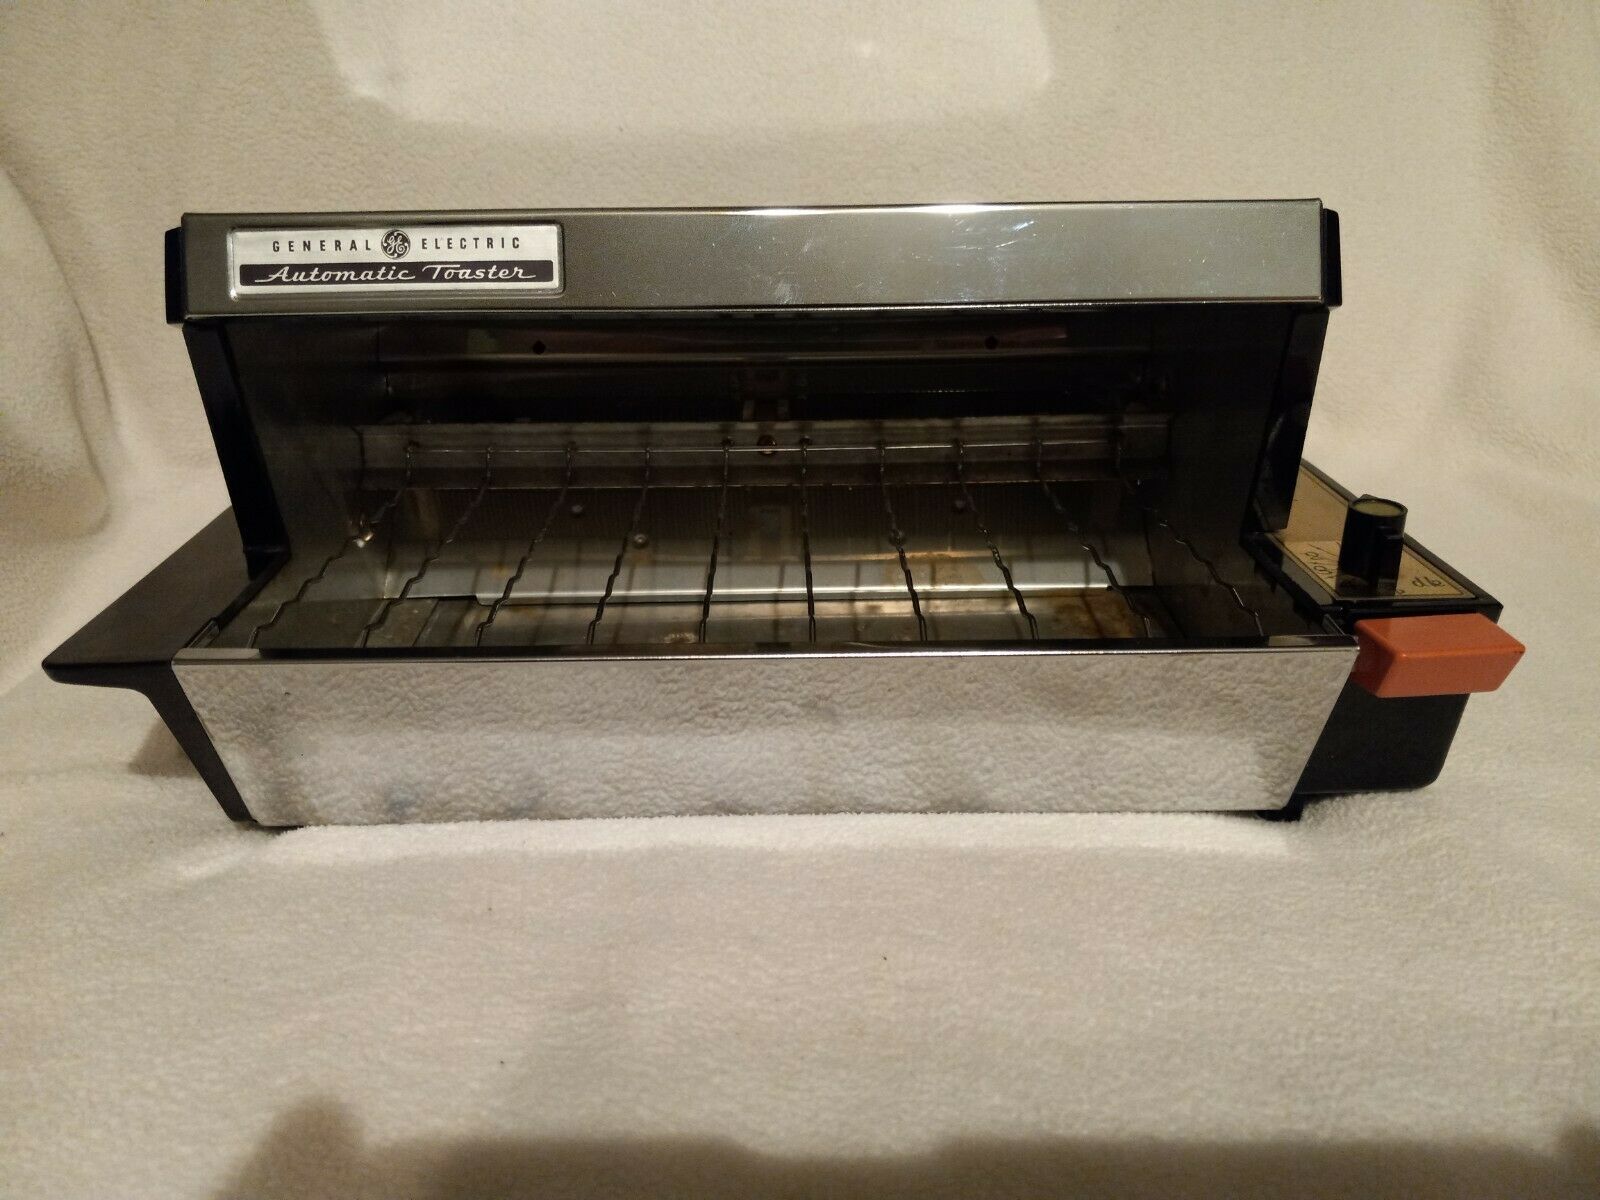 Vintage Deco Mid-century General Electric Automatic Toaster 22t15 Open Face